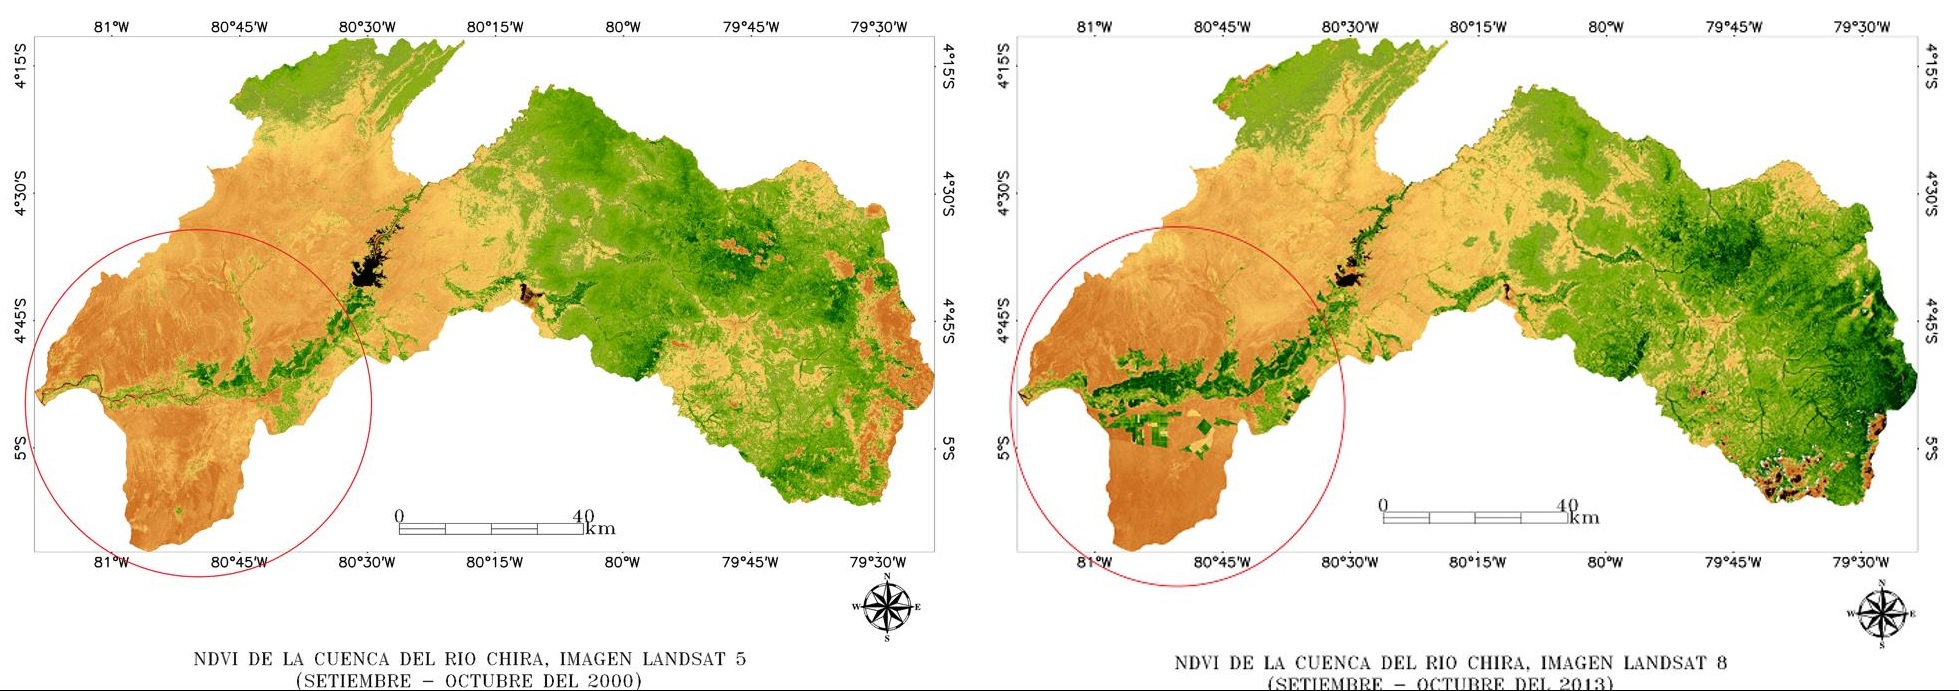 Remote sensing images showing greening in the Chira Valley from 2000 to 2013 (red circle)